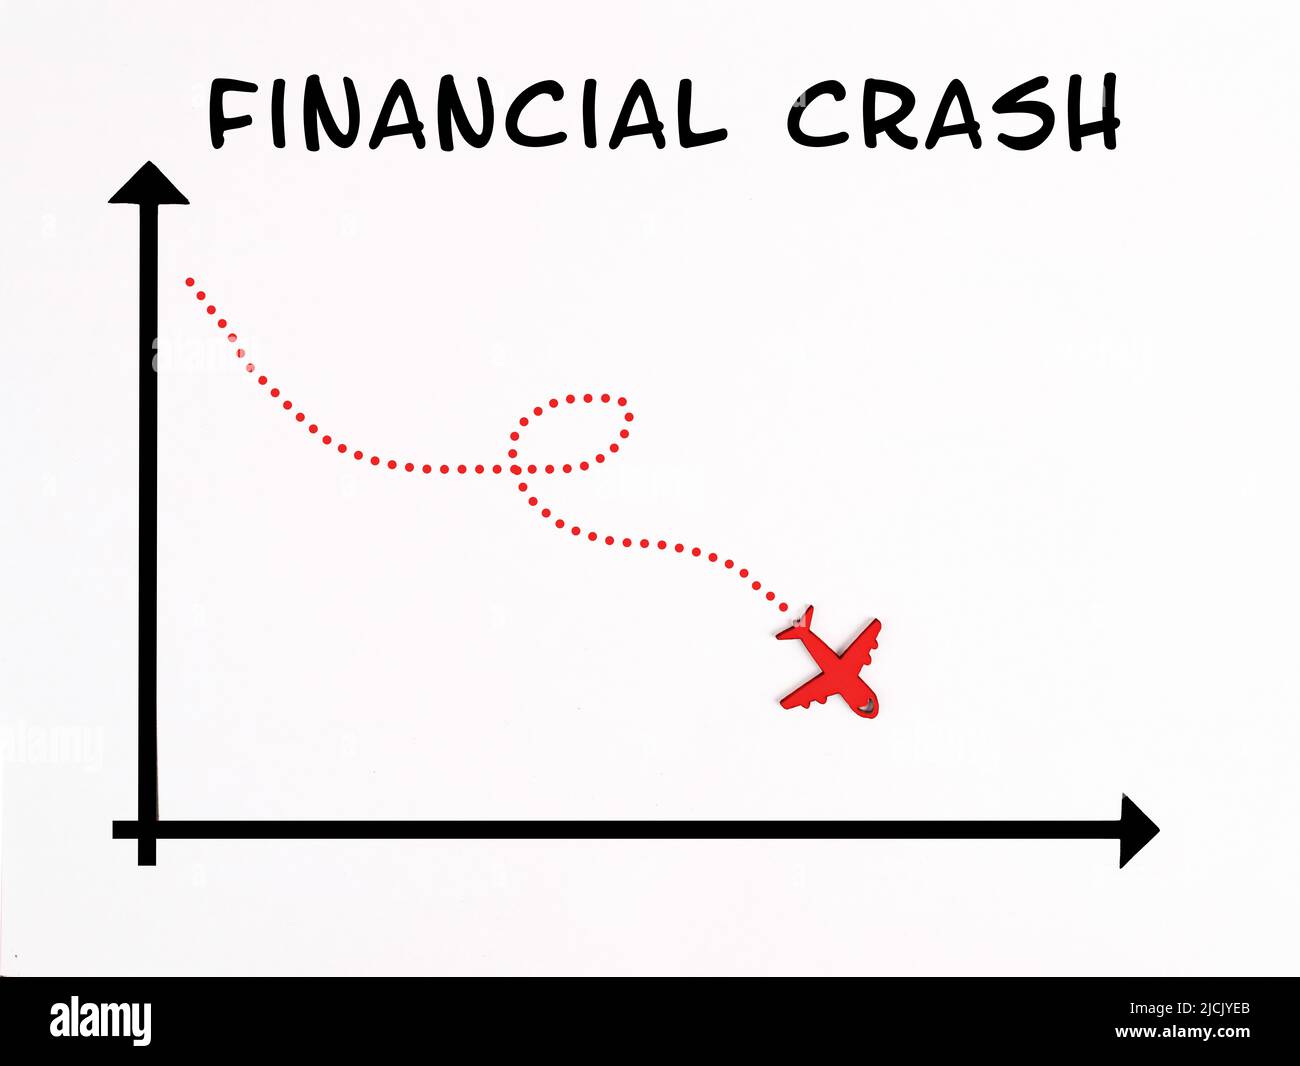 Graph with an airplane falling down, financial crash, inflation crisis, risk for investments, global economic depression, business bankruptcy Stock Photo